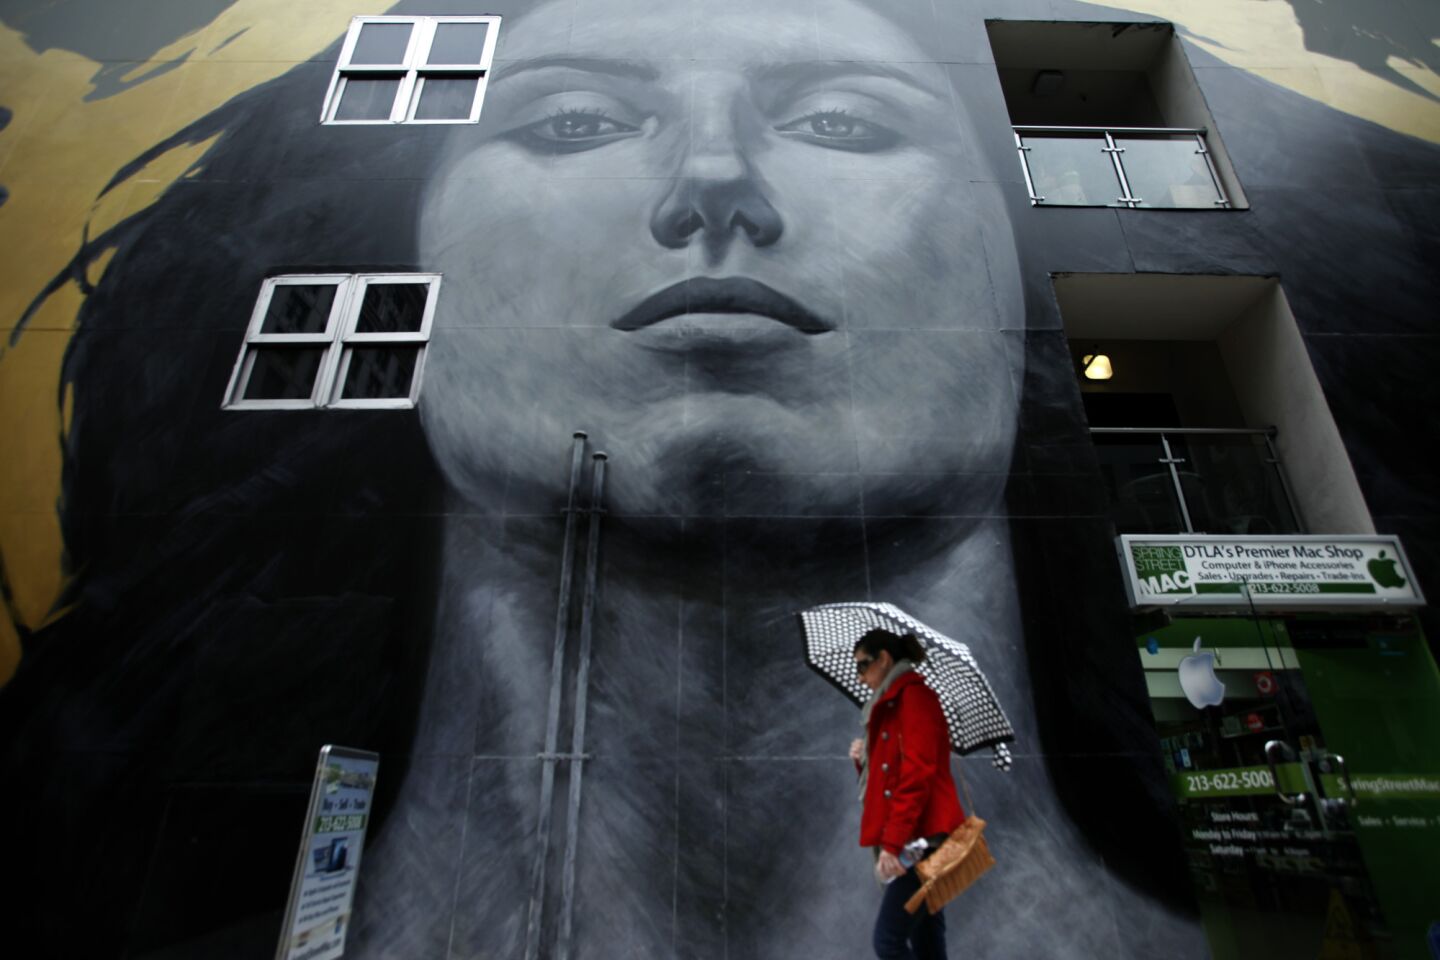 Ana Fuentes makes her way through the rain and walks past the mural by Robert Vargas and Michael Blaze entitled, "Our Lady of DTLA," that graces the SB Tower building at 6ht and Spring Streets People in downtown Los Angeles.